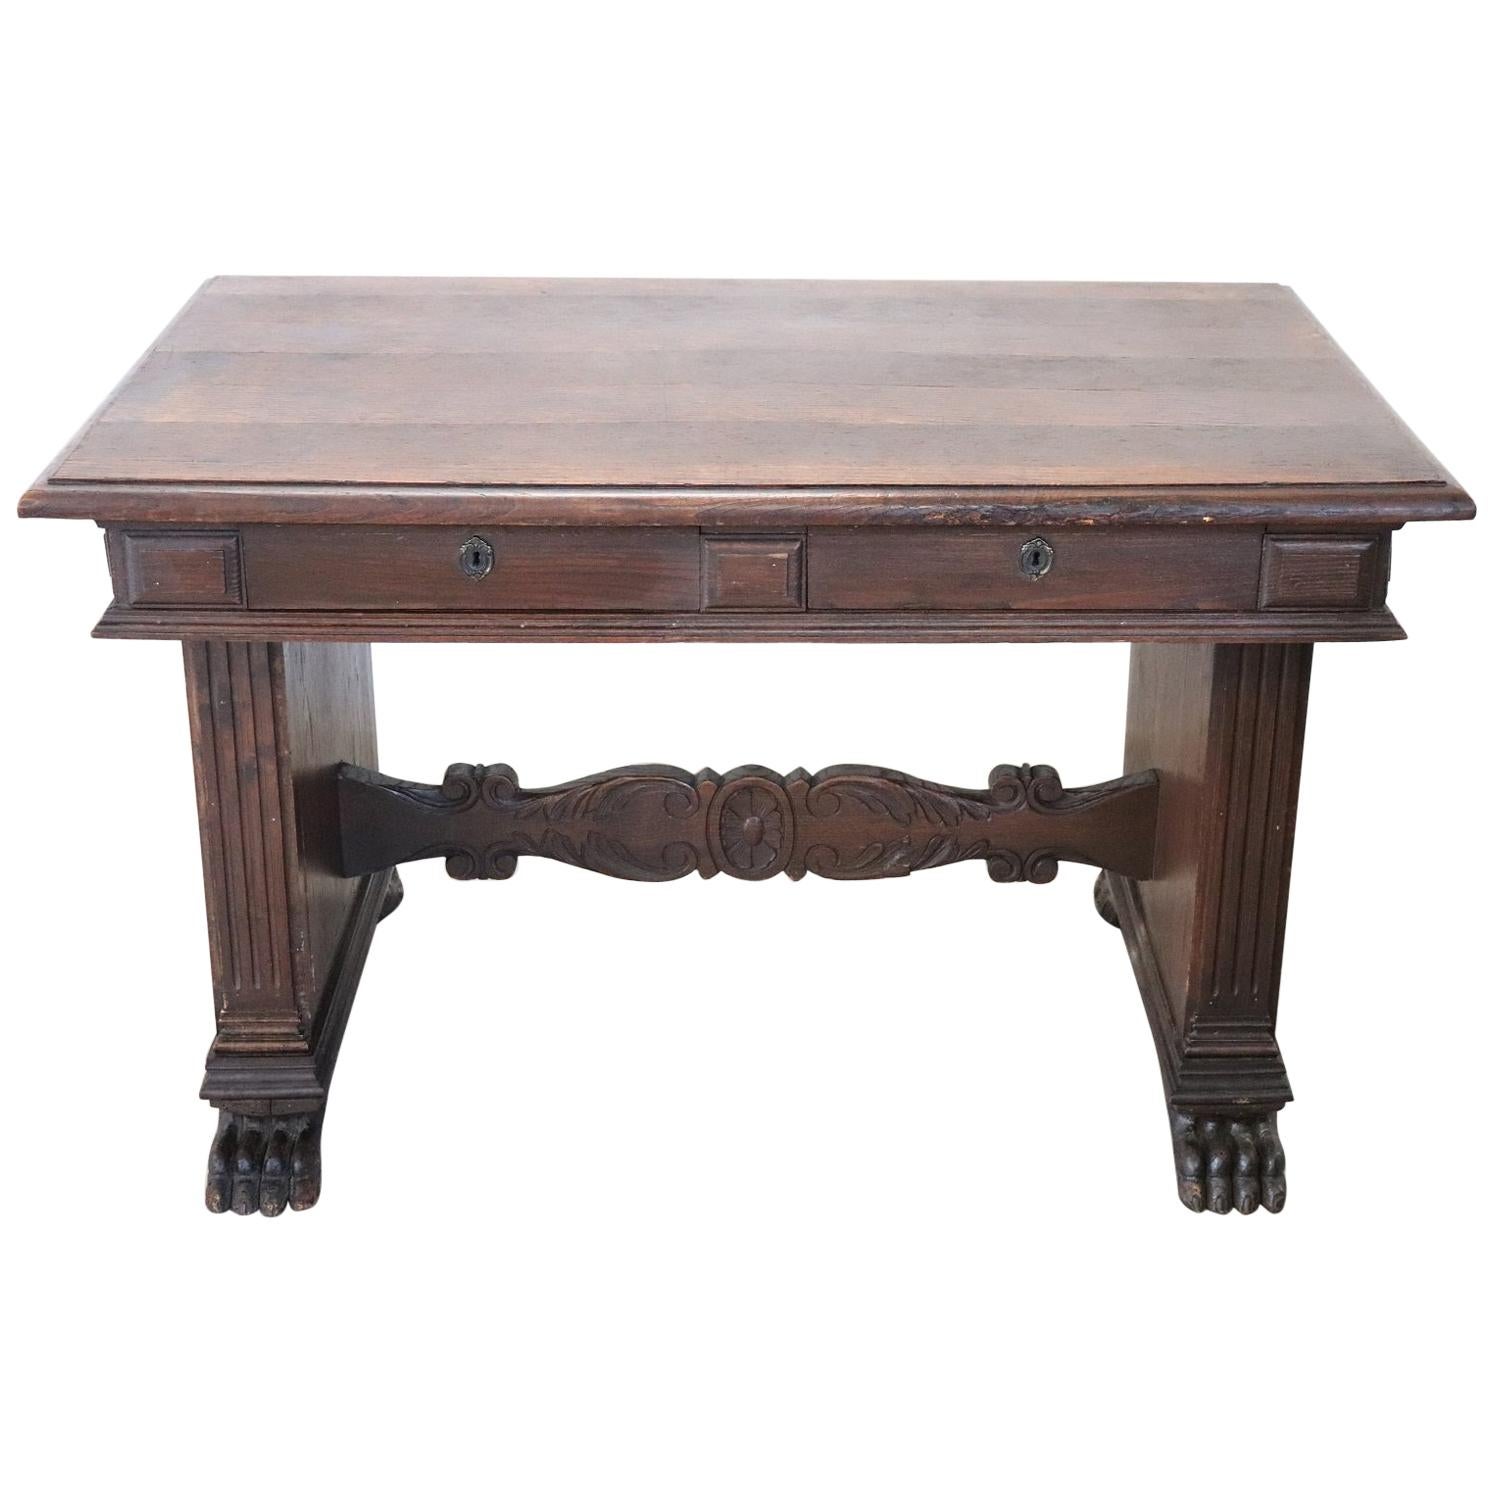 19th Century Italian Renaissance Style Carved Oak Desk or Writing Table